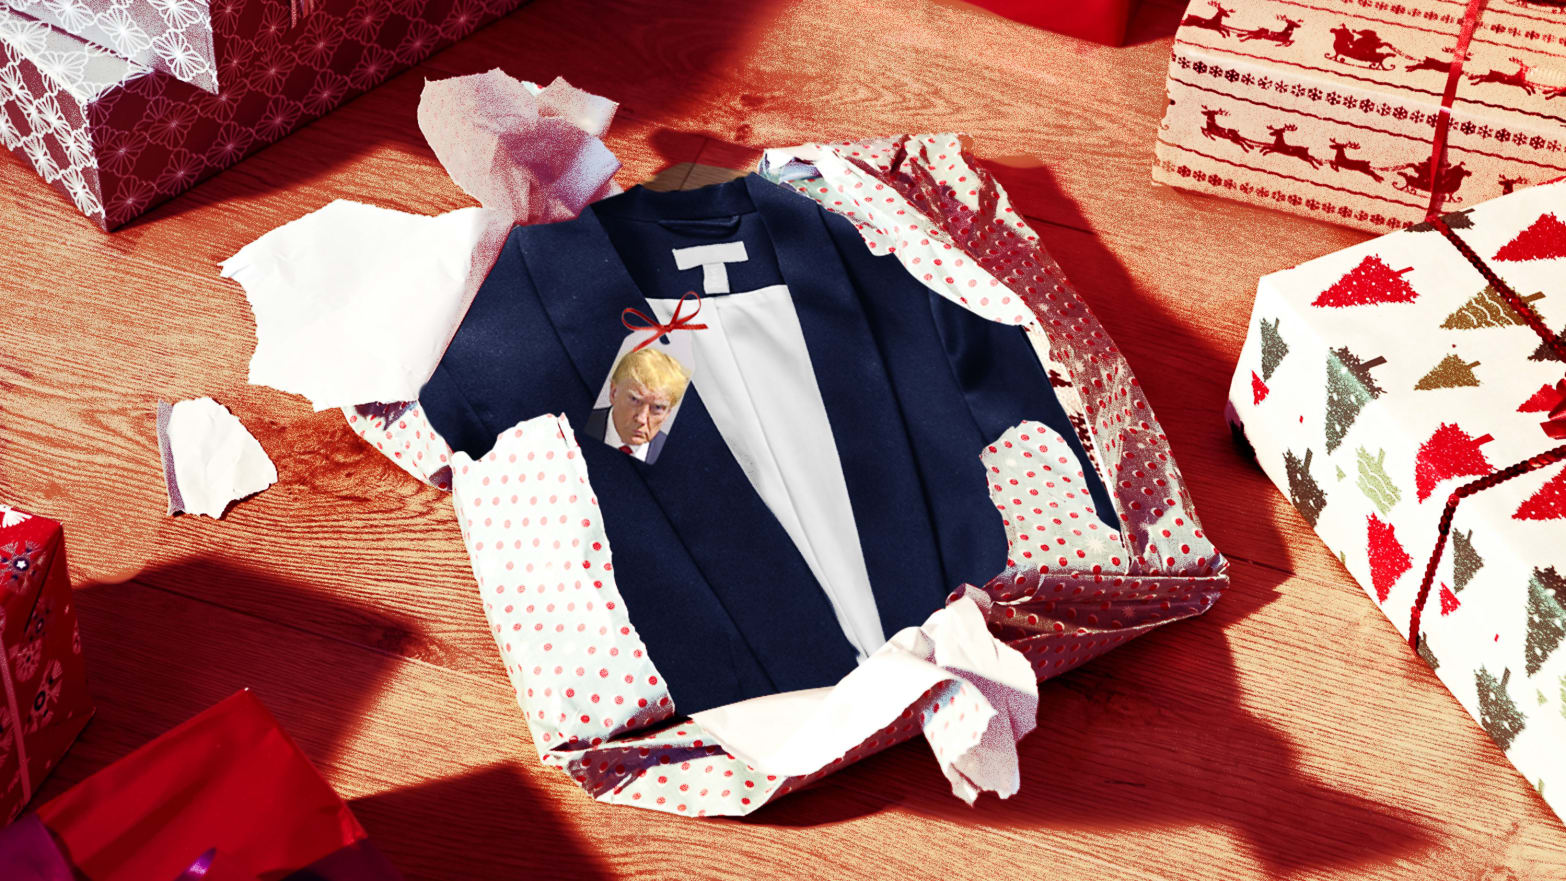 A photo illustration showing an unwrapped gift of Donald Trump’s suit from his Georgia mugshot.